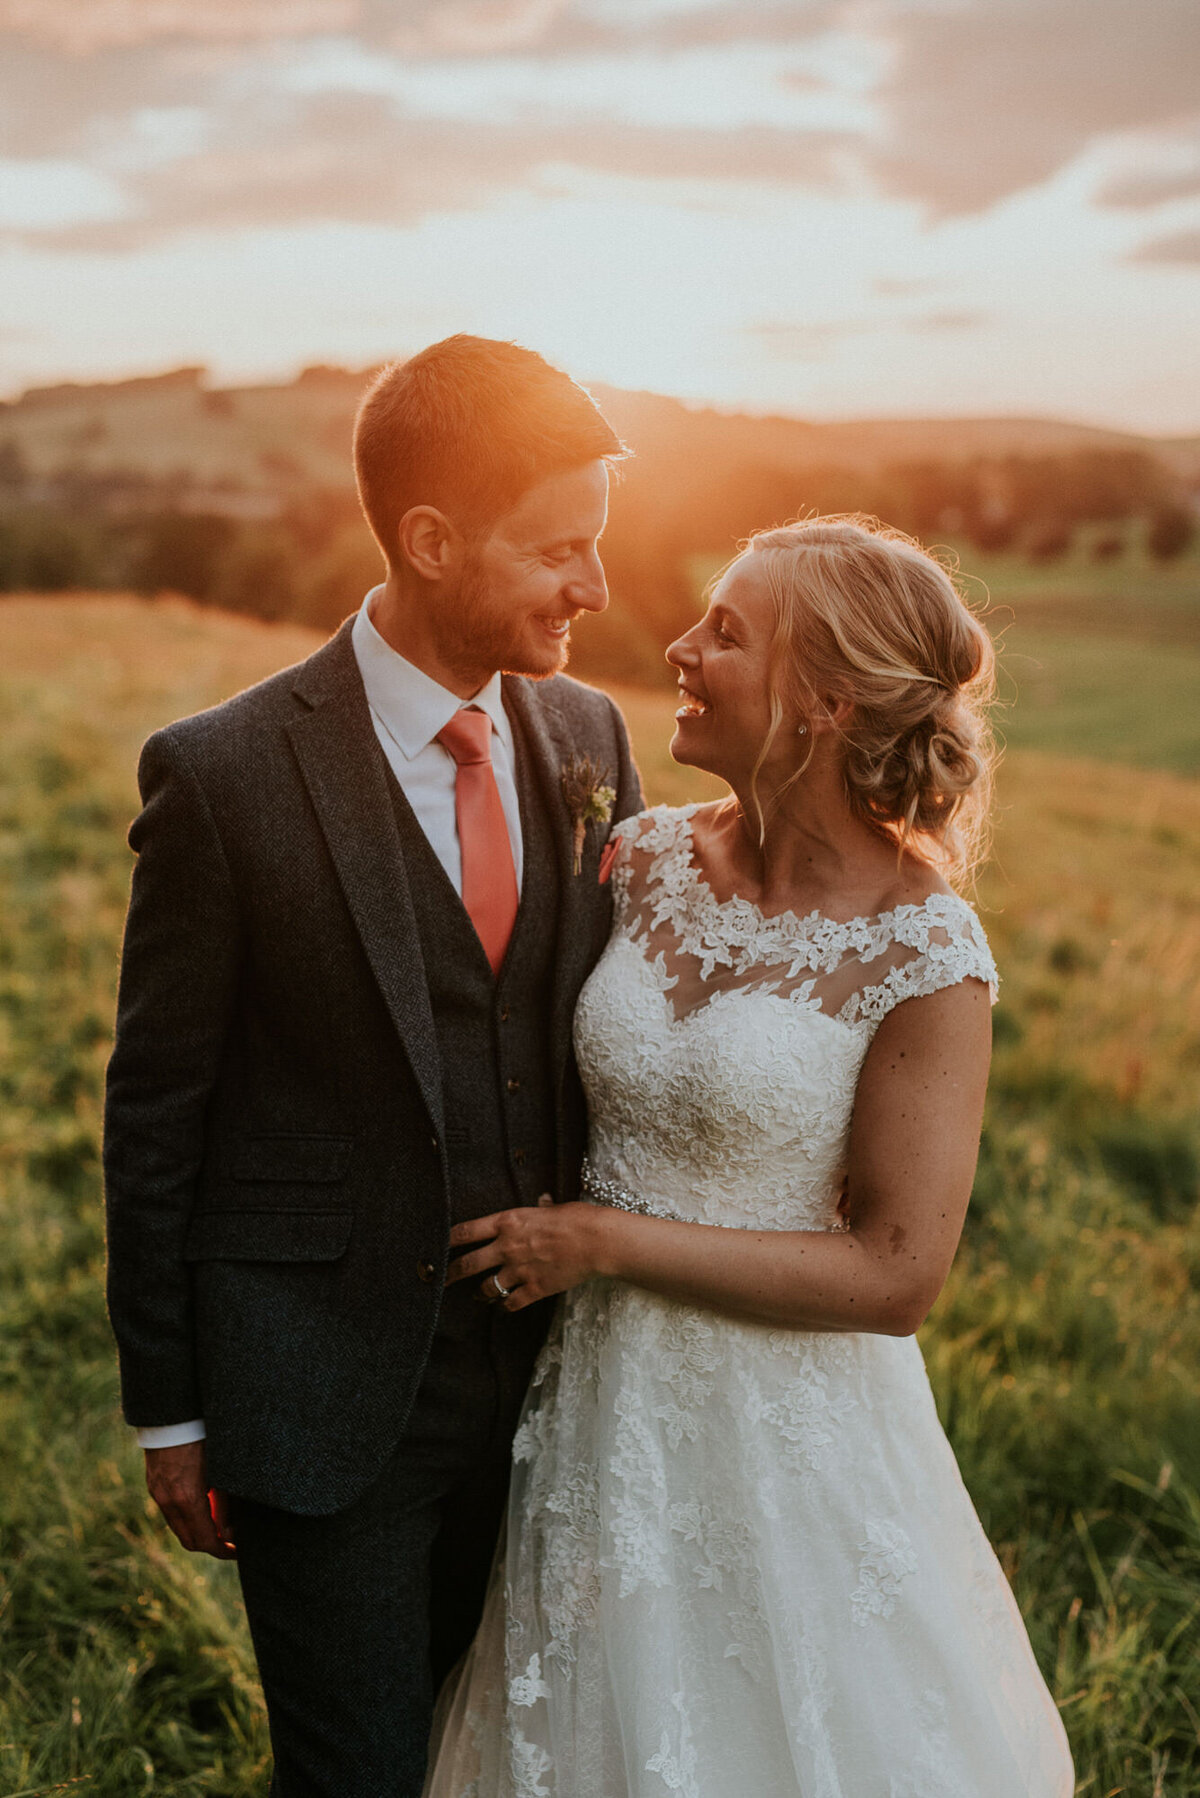 Bride and groom smiling at each other in sunlight